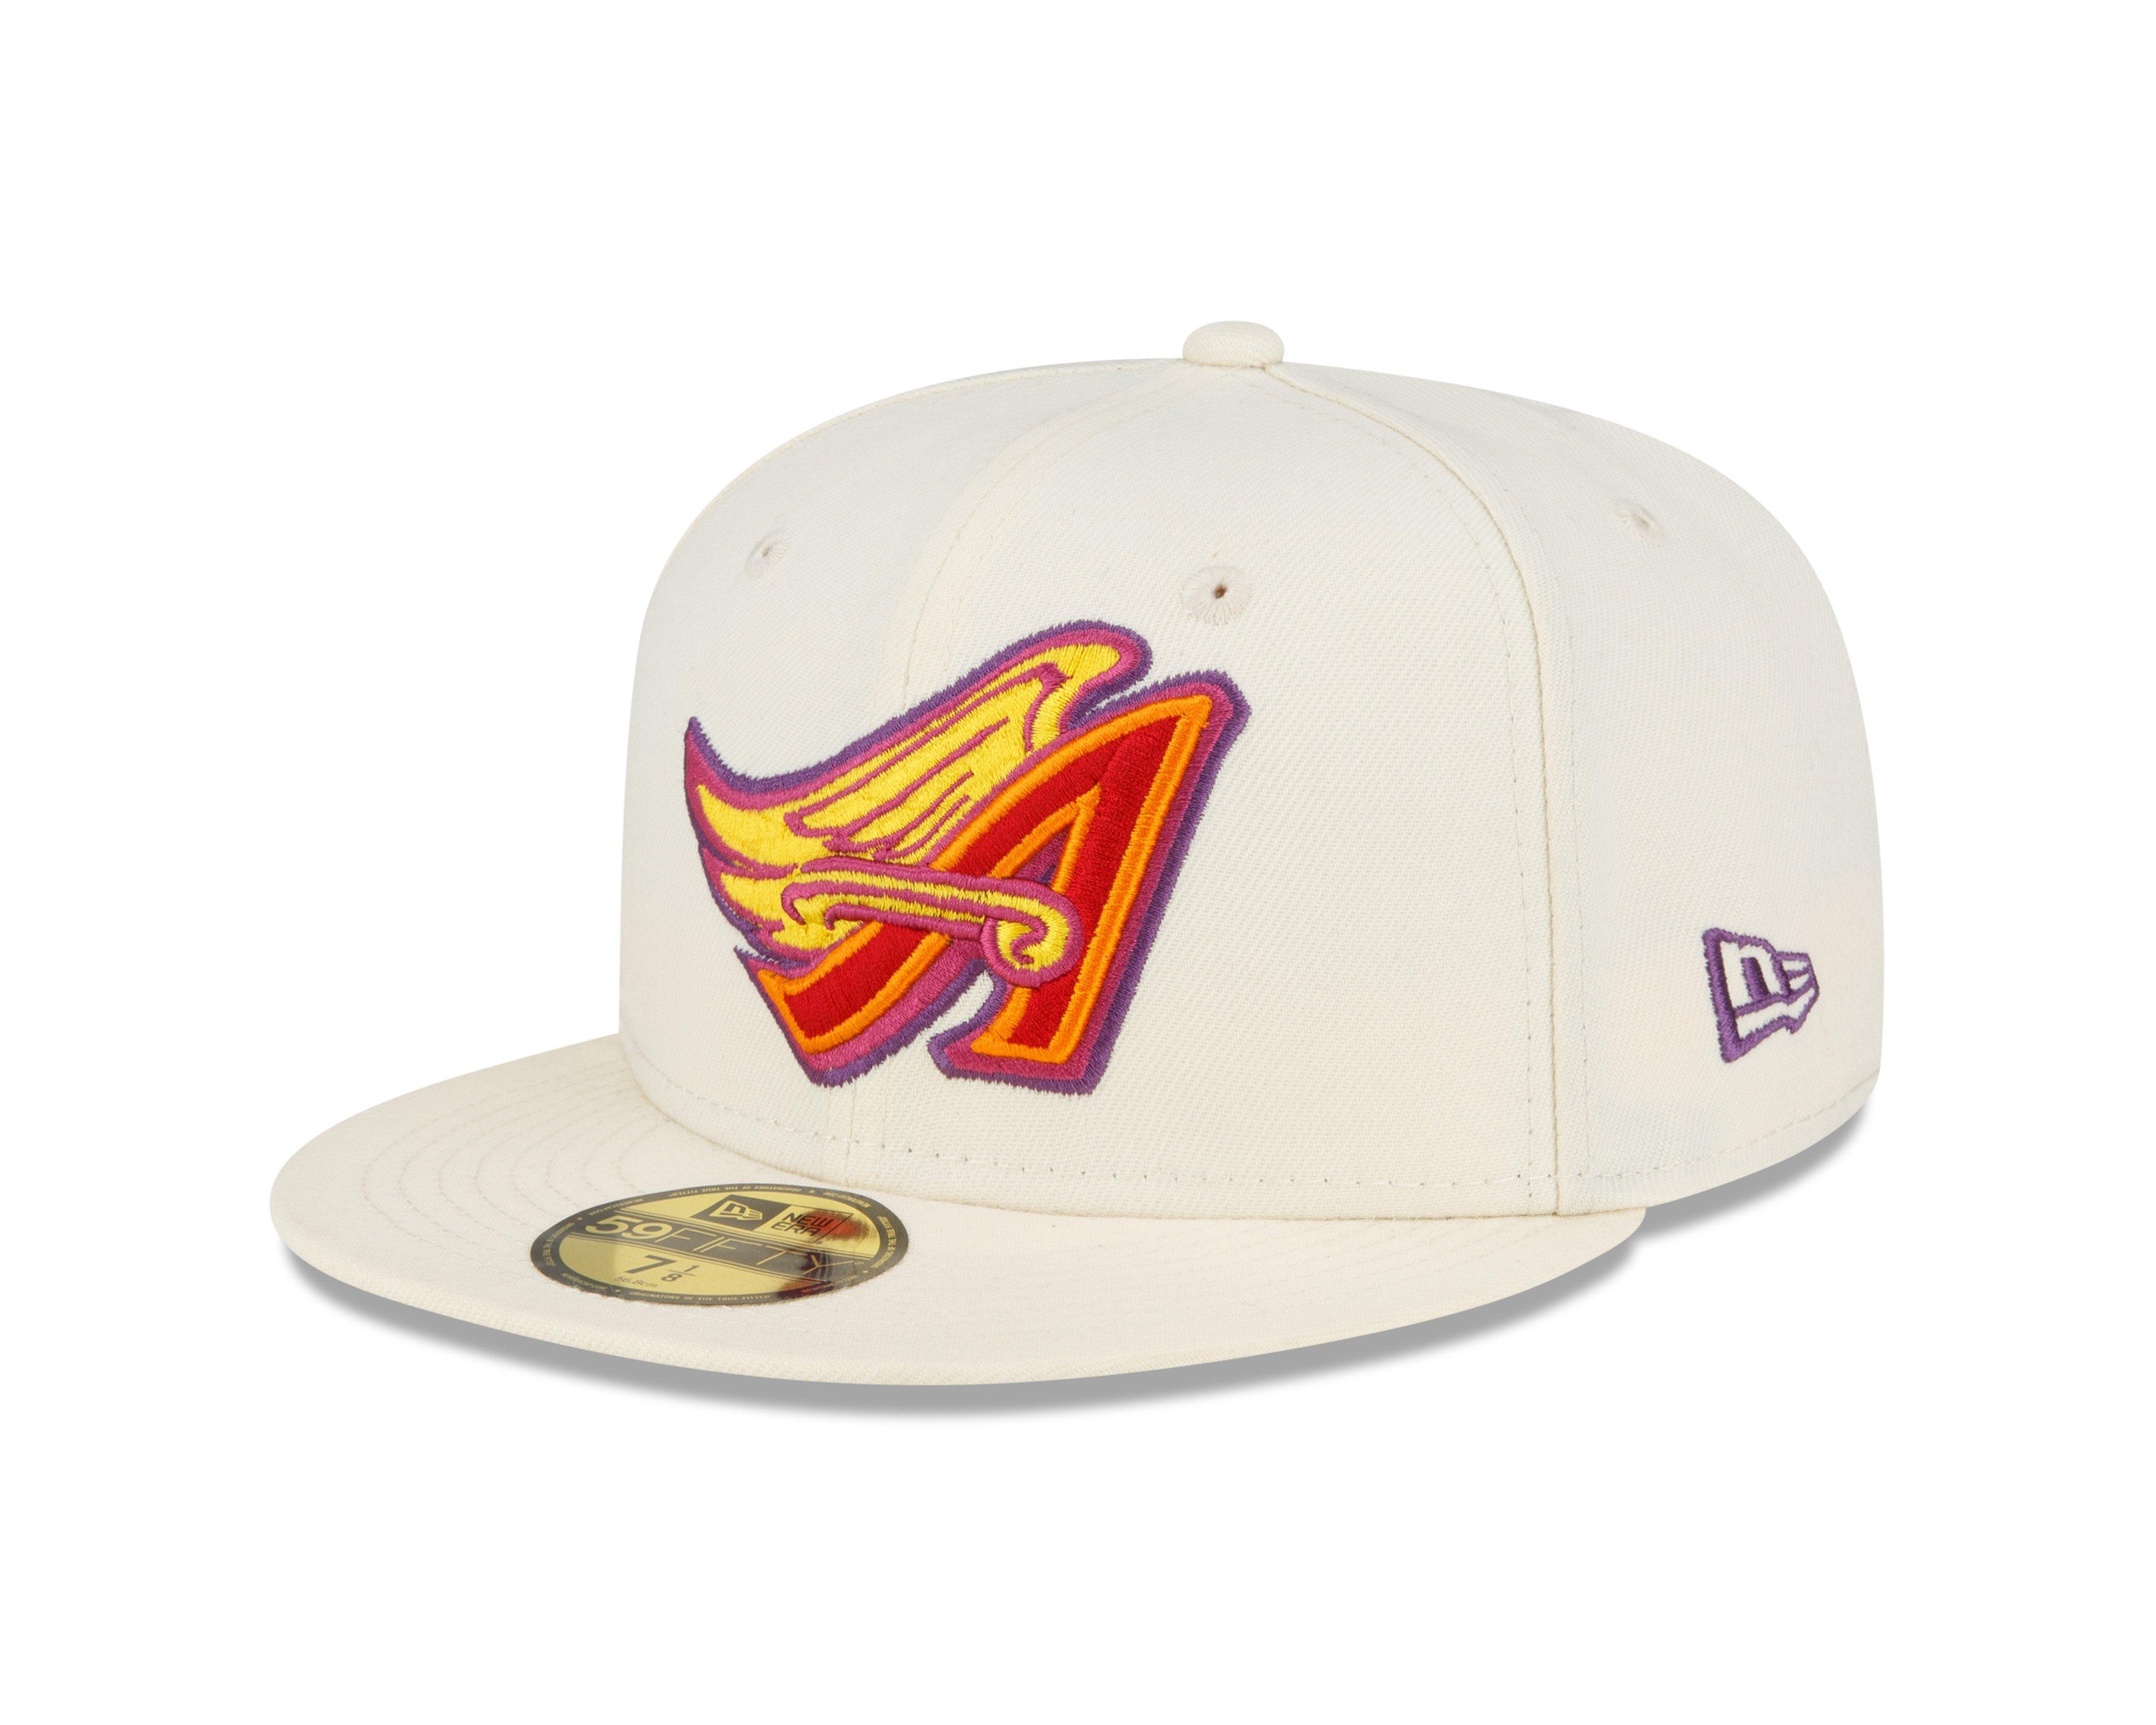 Los Angeles LAKERS NBA Featherweight 9FIFTY New Era purple Cap